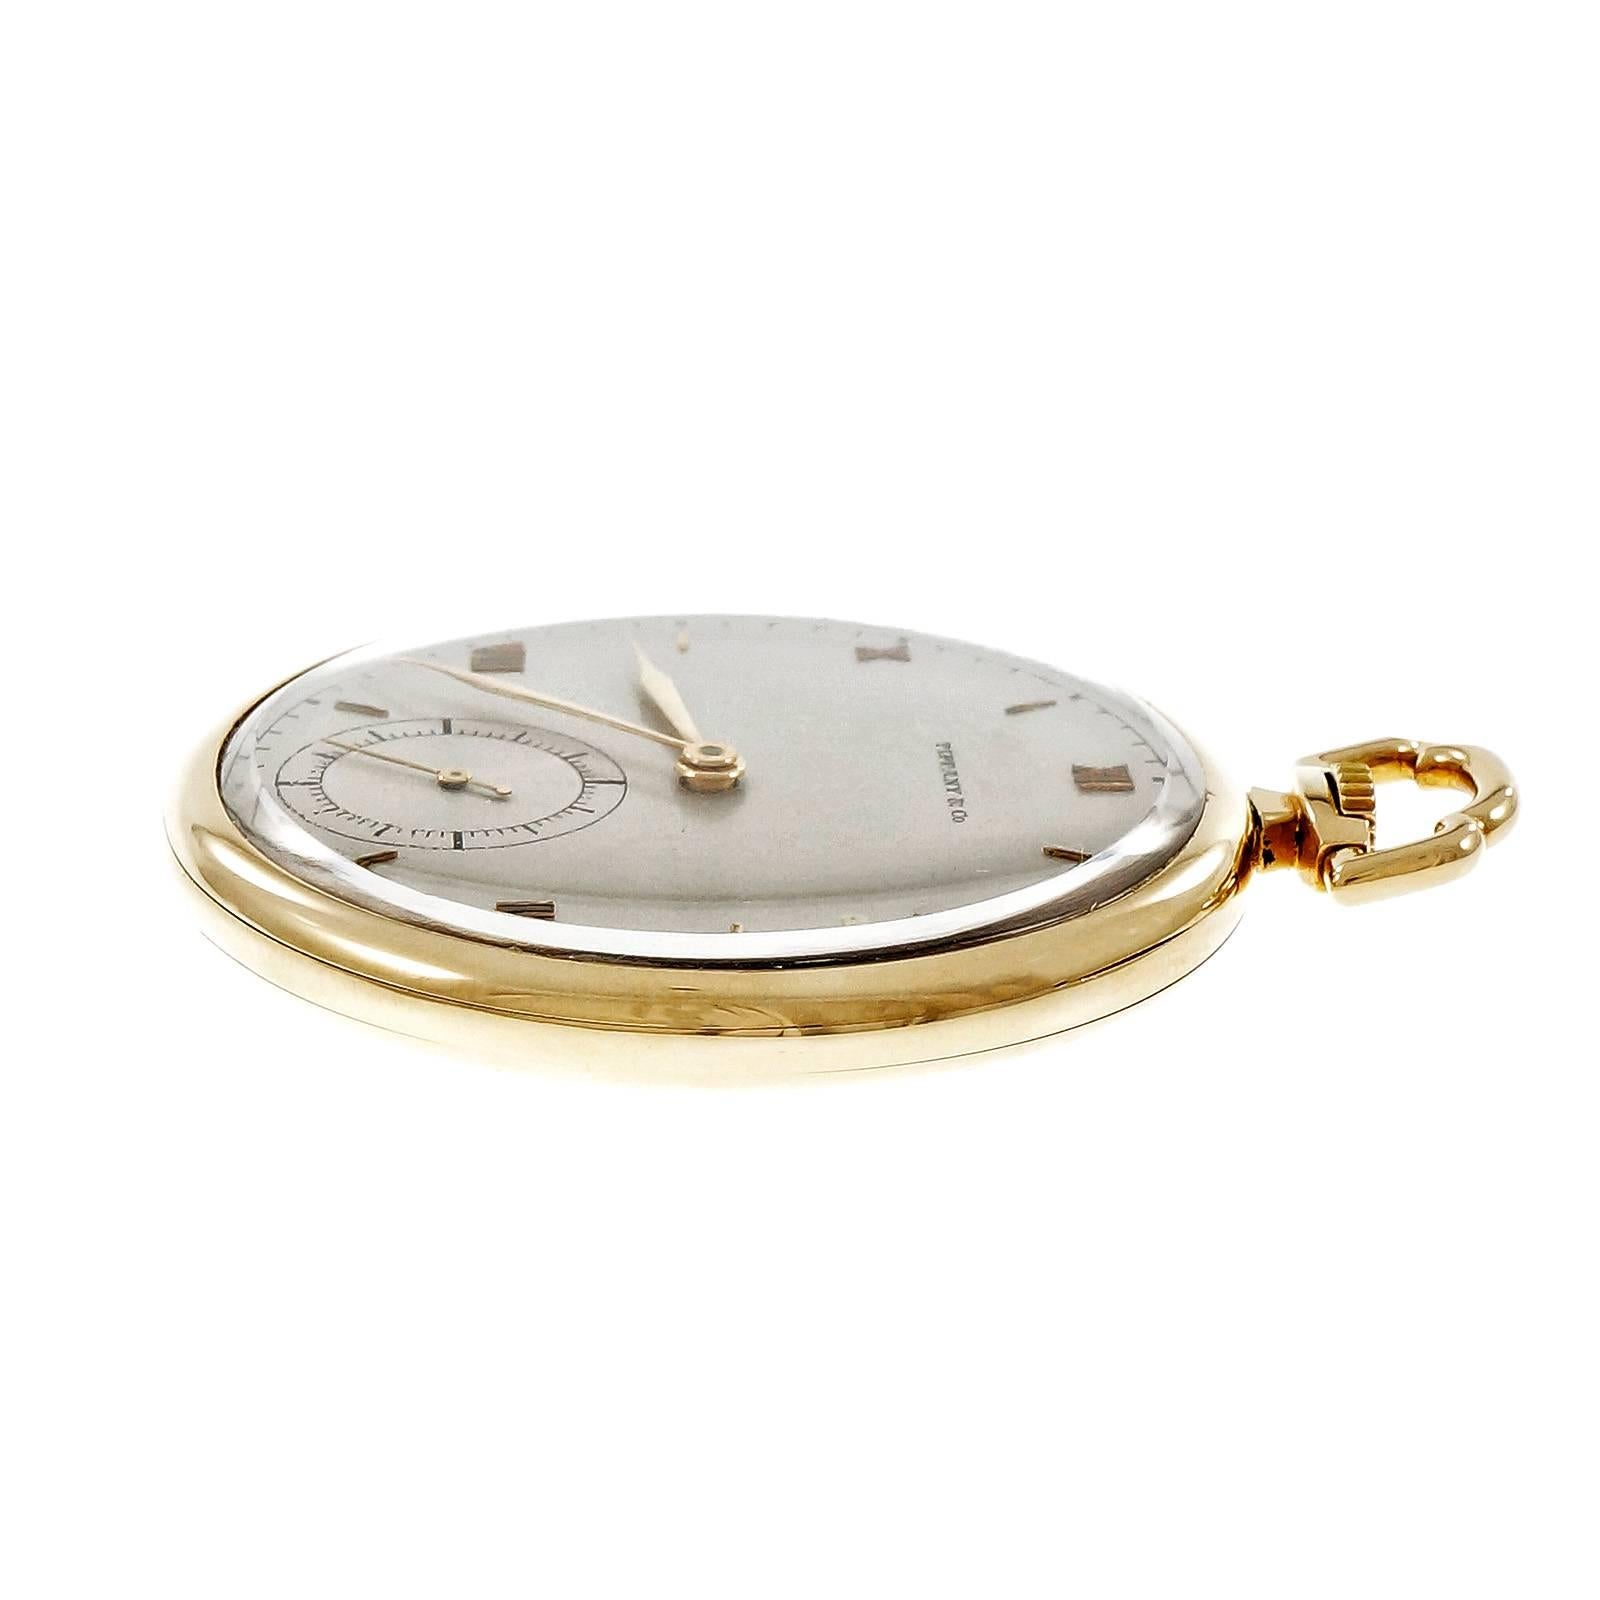 Tiffany & Co solid 14k yellow gold open face high grade pocket watch. Pristine dial, simple plain case and case back. One owner since 1943. Meylan 21 jewel manual wind movement. Double back cover. Engraved for presentation inside case in 1943.